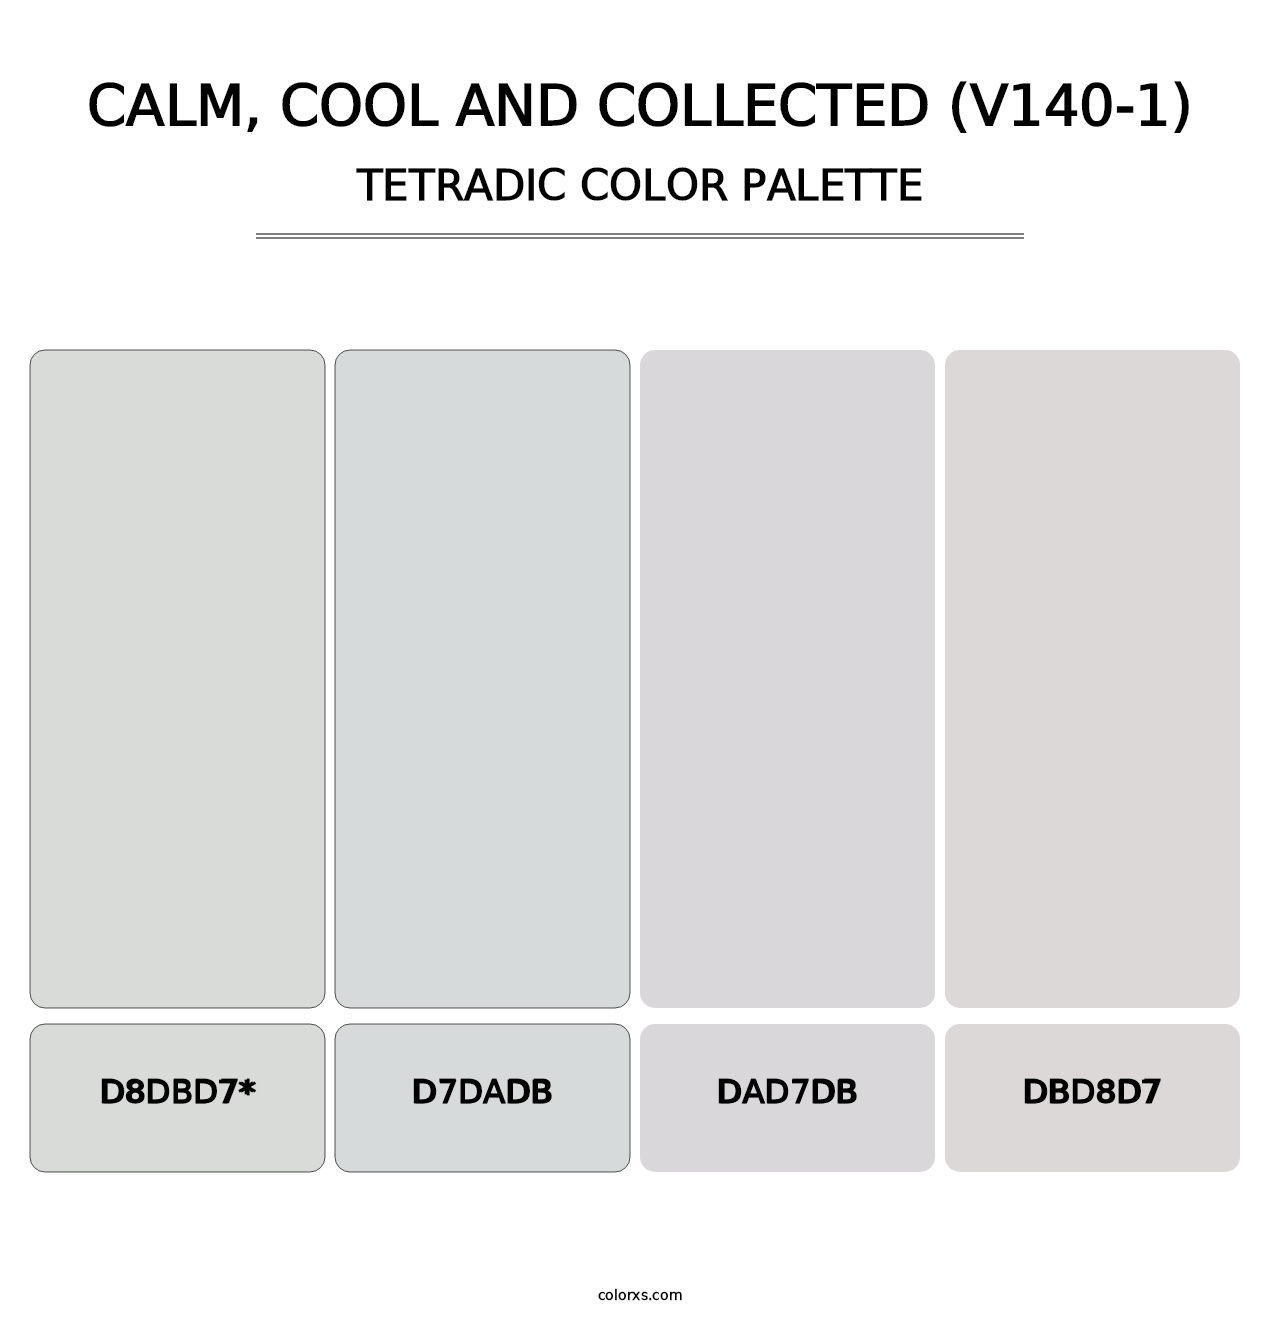 Calm, Cool and Collected (V140-1) - Tetradic Color Palette